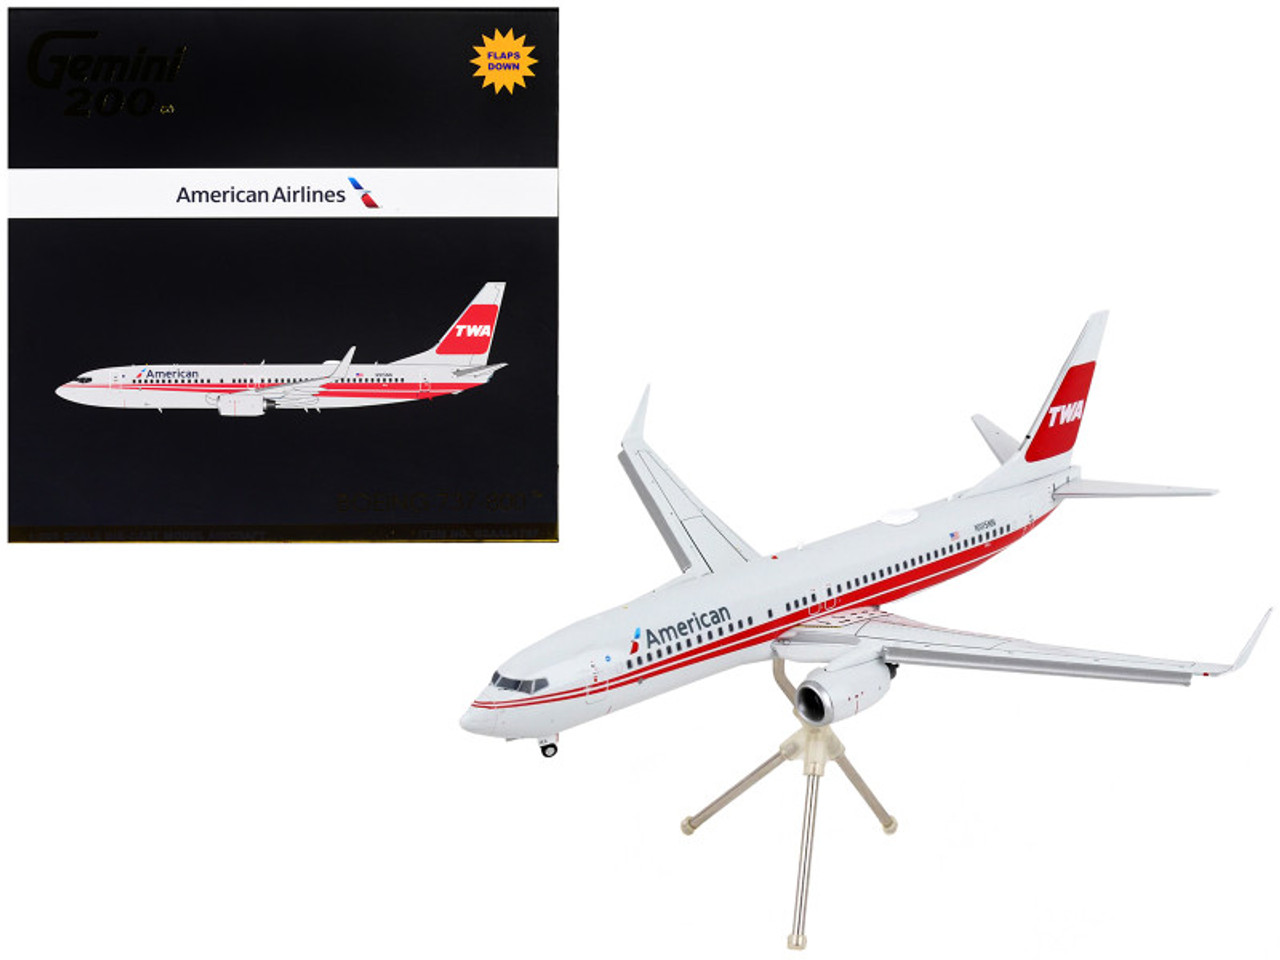 Boeing 737-800 Commercial Aircraft with Flaps Down "American Airlines - Trans World Airlines" Gray with Red Stripes "Gemini 200" Series 1/200 Diecast Model Airplane by GeminiJets